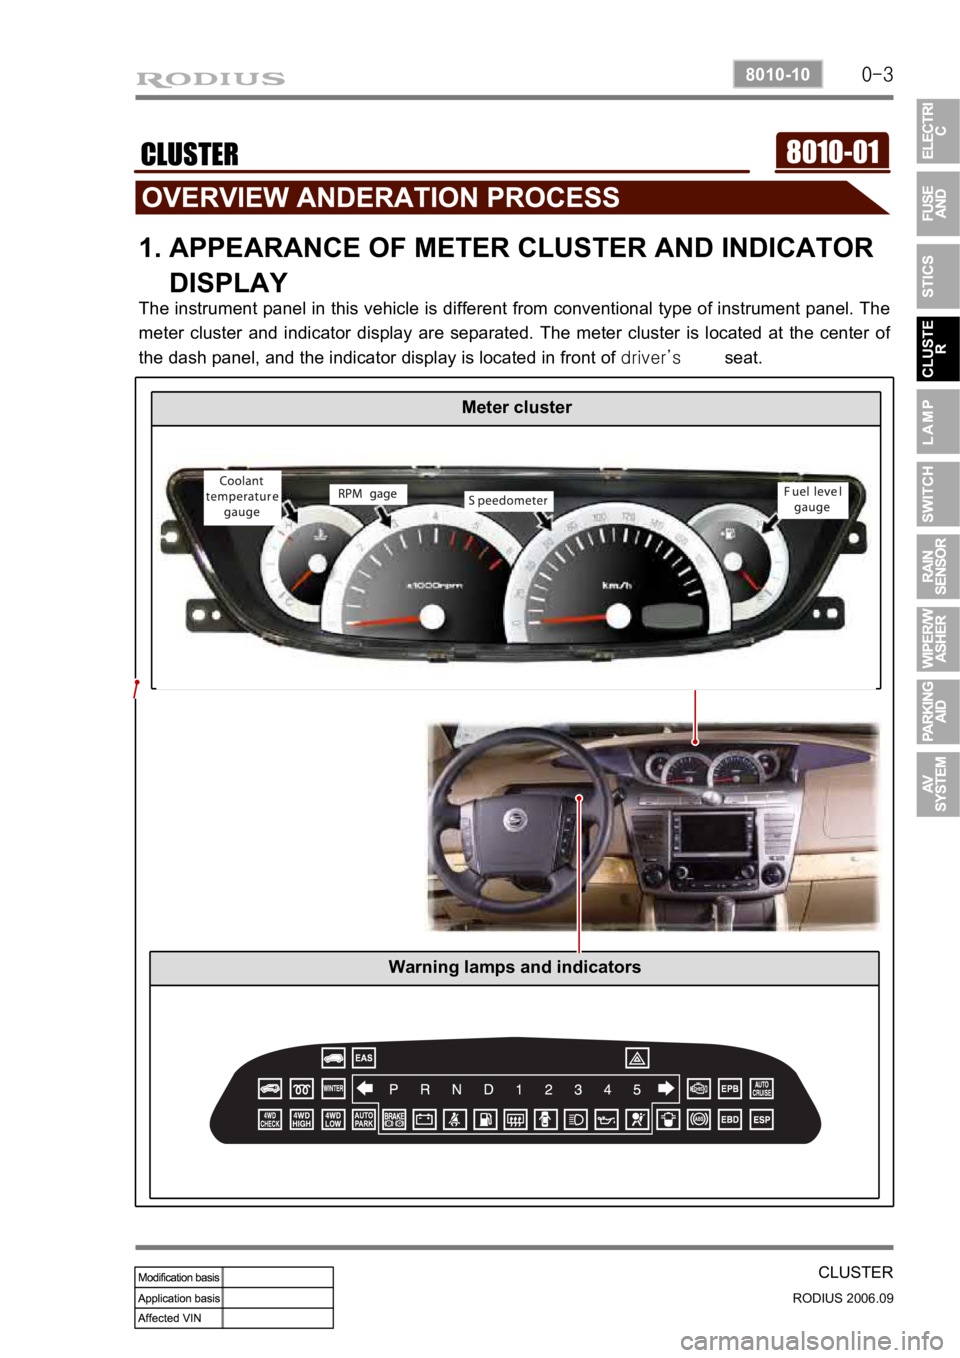 SSANGYONG RODIUS 2007  Service Manual 0-3
CLUSTER
RODIUS 2006.09
8010-10
8010-01CLUSTER
1. APPEARANCE OF METER CLUSTER AND INDICATOR 
    DISPLAY
The instrument panel in this vehicle is different from conventional type of instrument panel